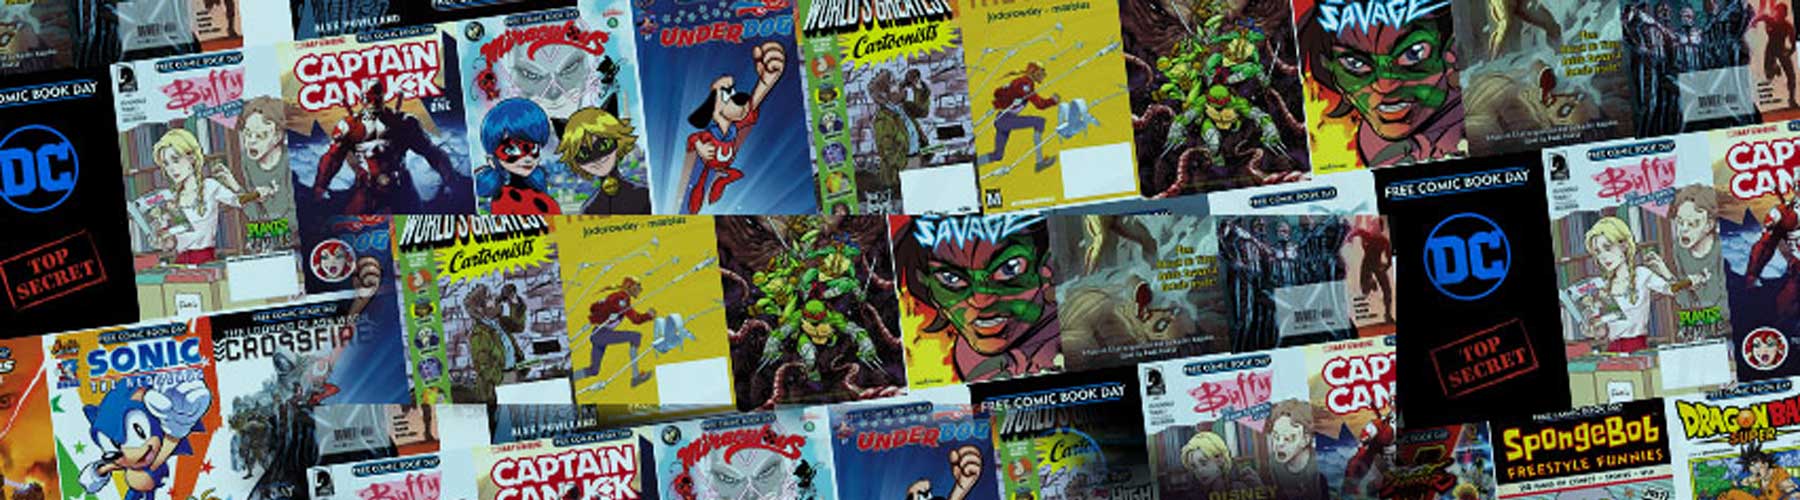 Swamp Thing Graphic Novels